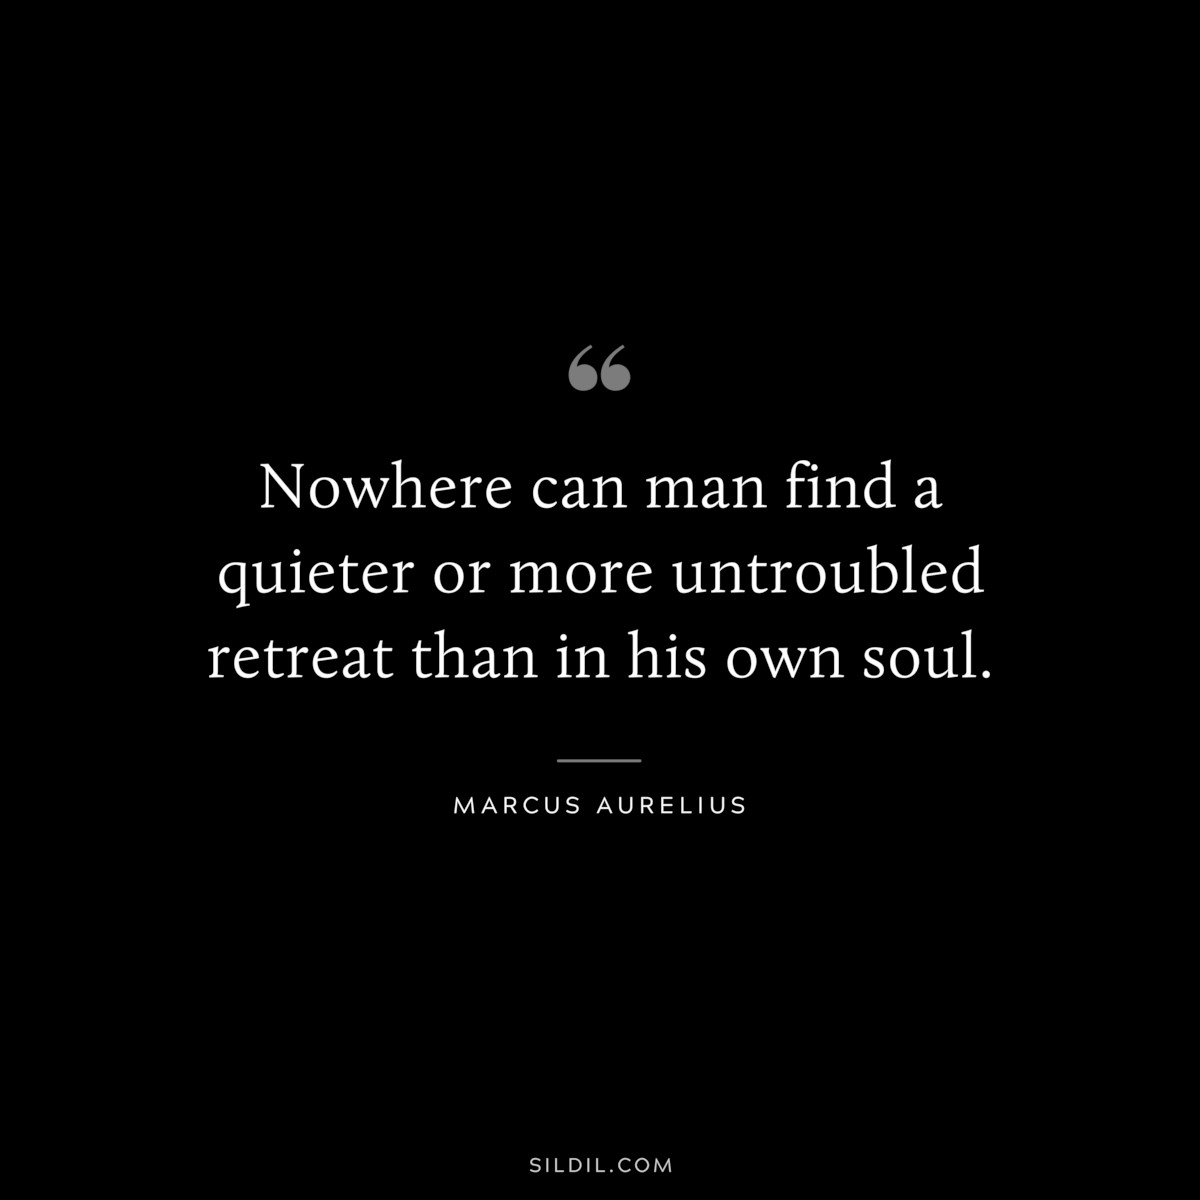 Nowhere can man find a quieter or more untroubled retreat than in his own soul. ― Marcus Aurelius